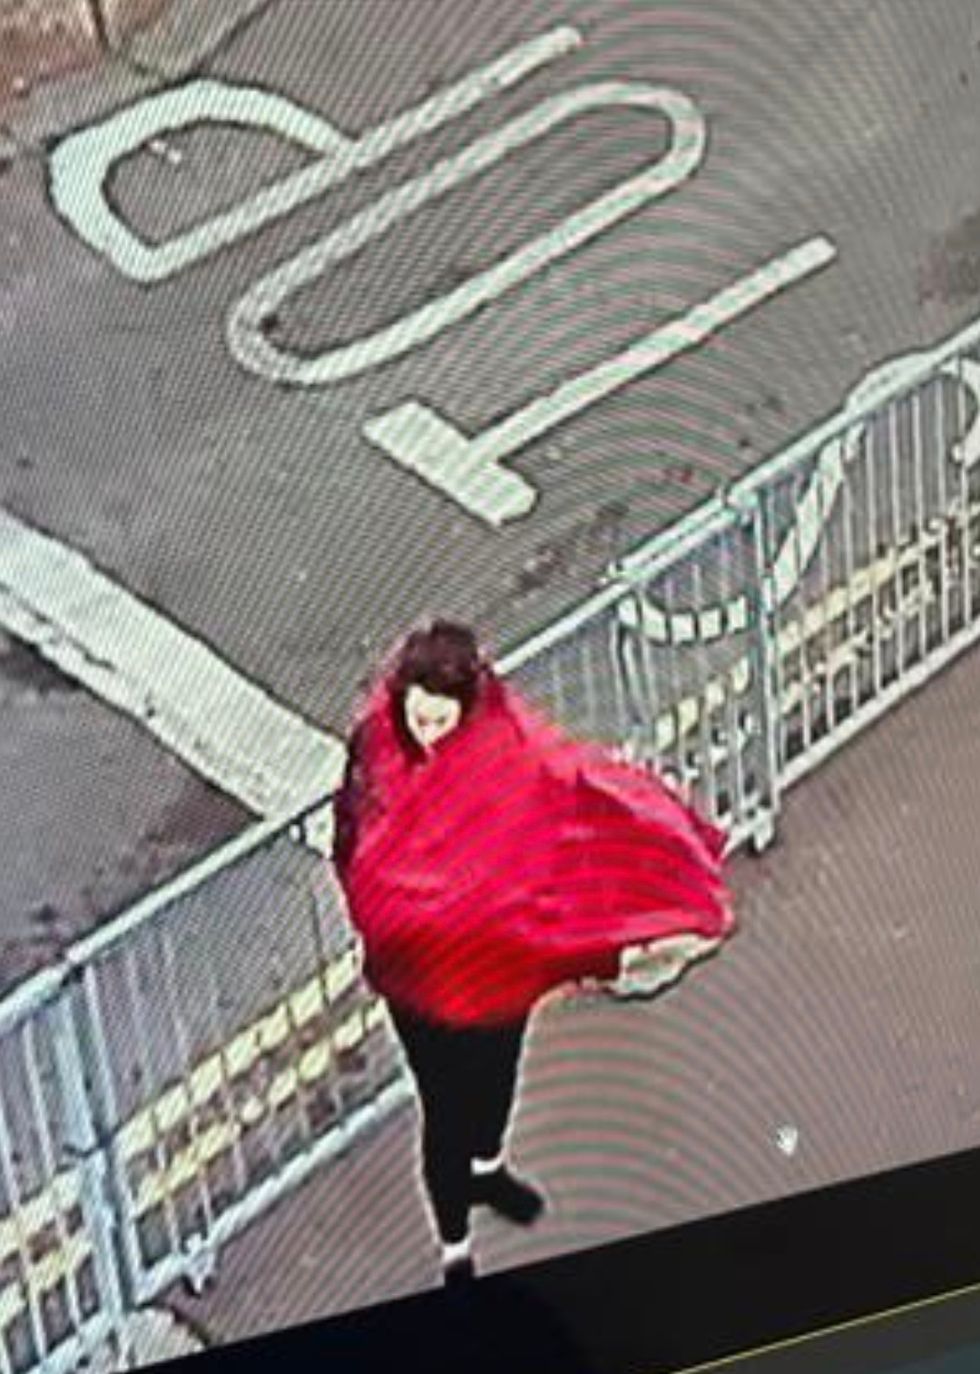 Police have released a CCTV image of a woman they believe is Constance Marten